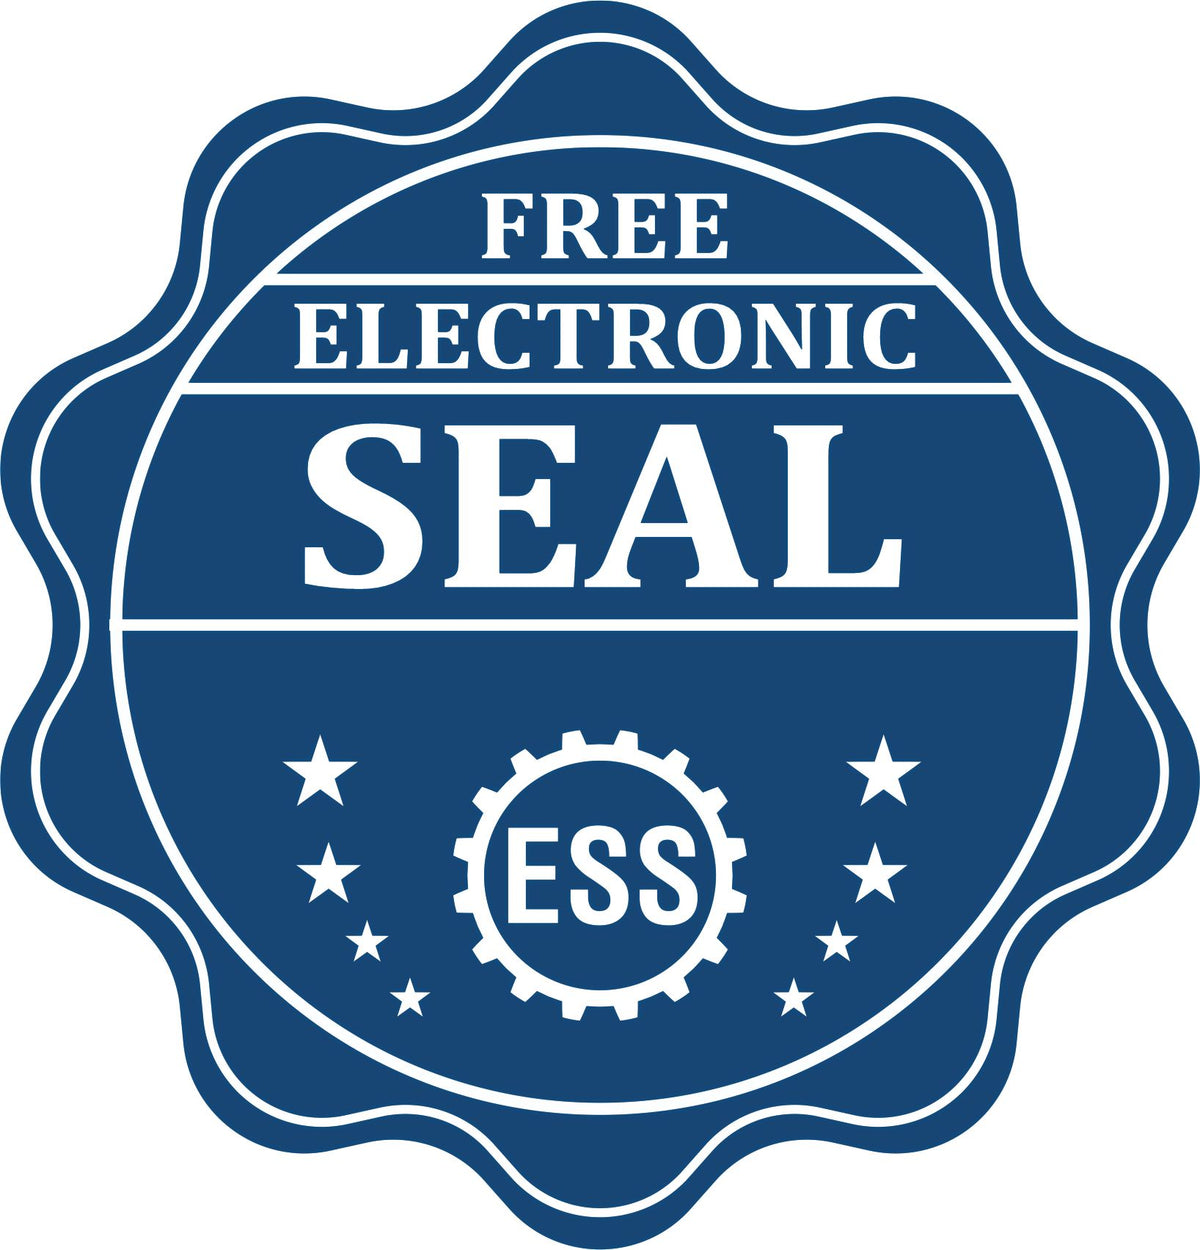 A badge showing a free electronic seal for the Premium MaxLight Pre-Inked Illinois Geology Stamp with stars and the ESS gear on the emblem.